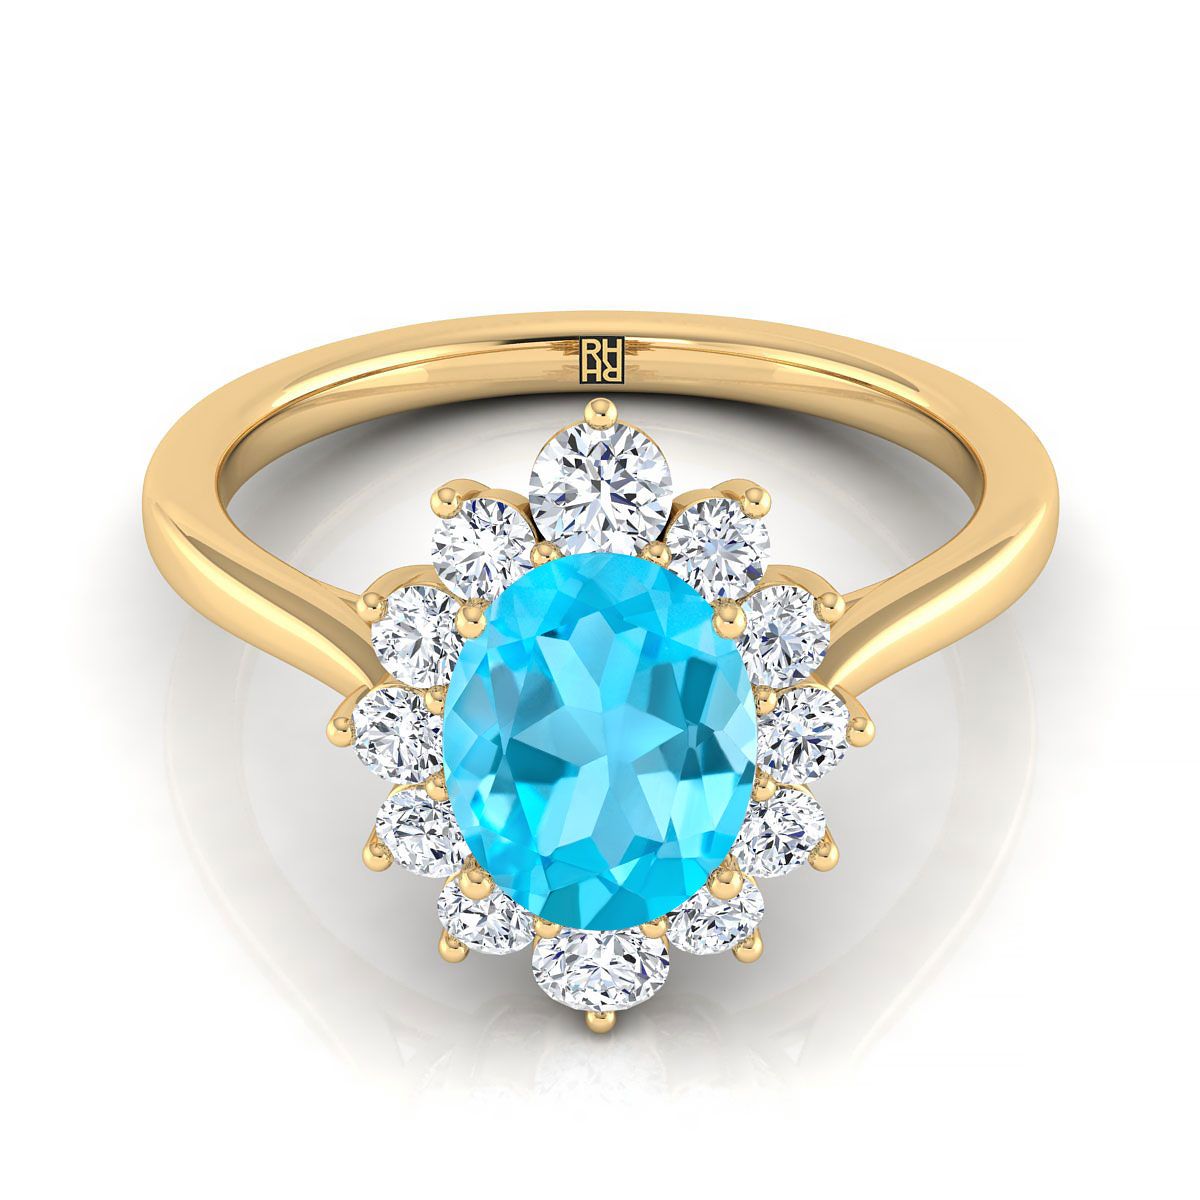 18K Yellow Gold Oval Swiss Blue Topaz Floral Diamond Halo Engagement Ring -1/2ctw